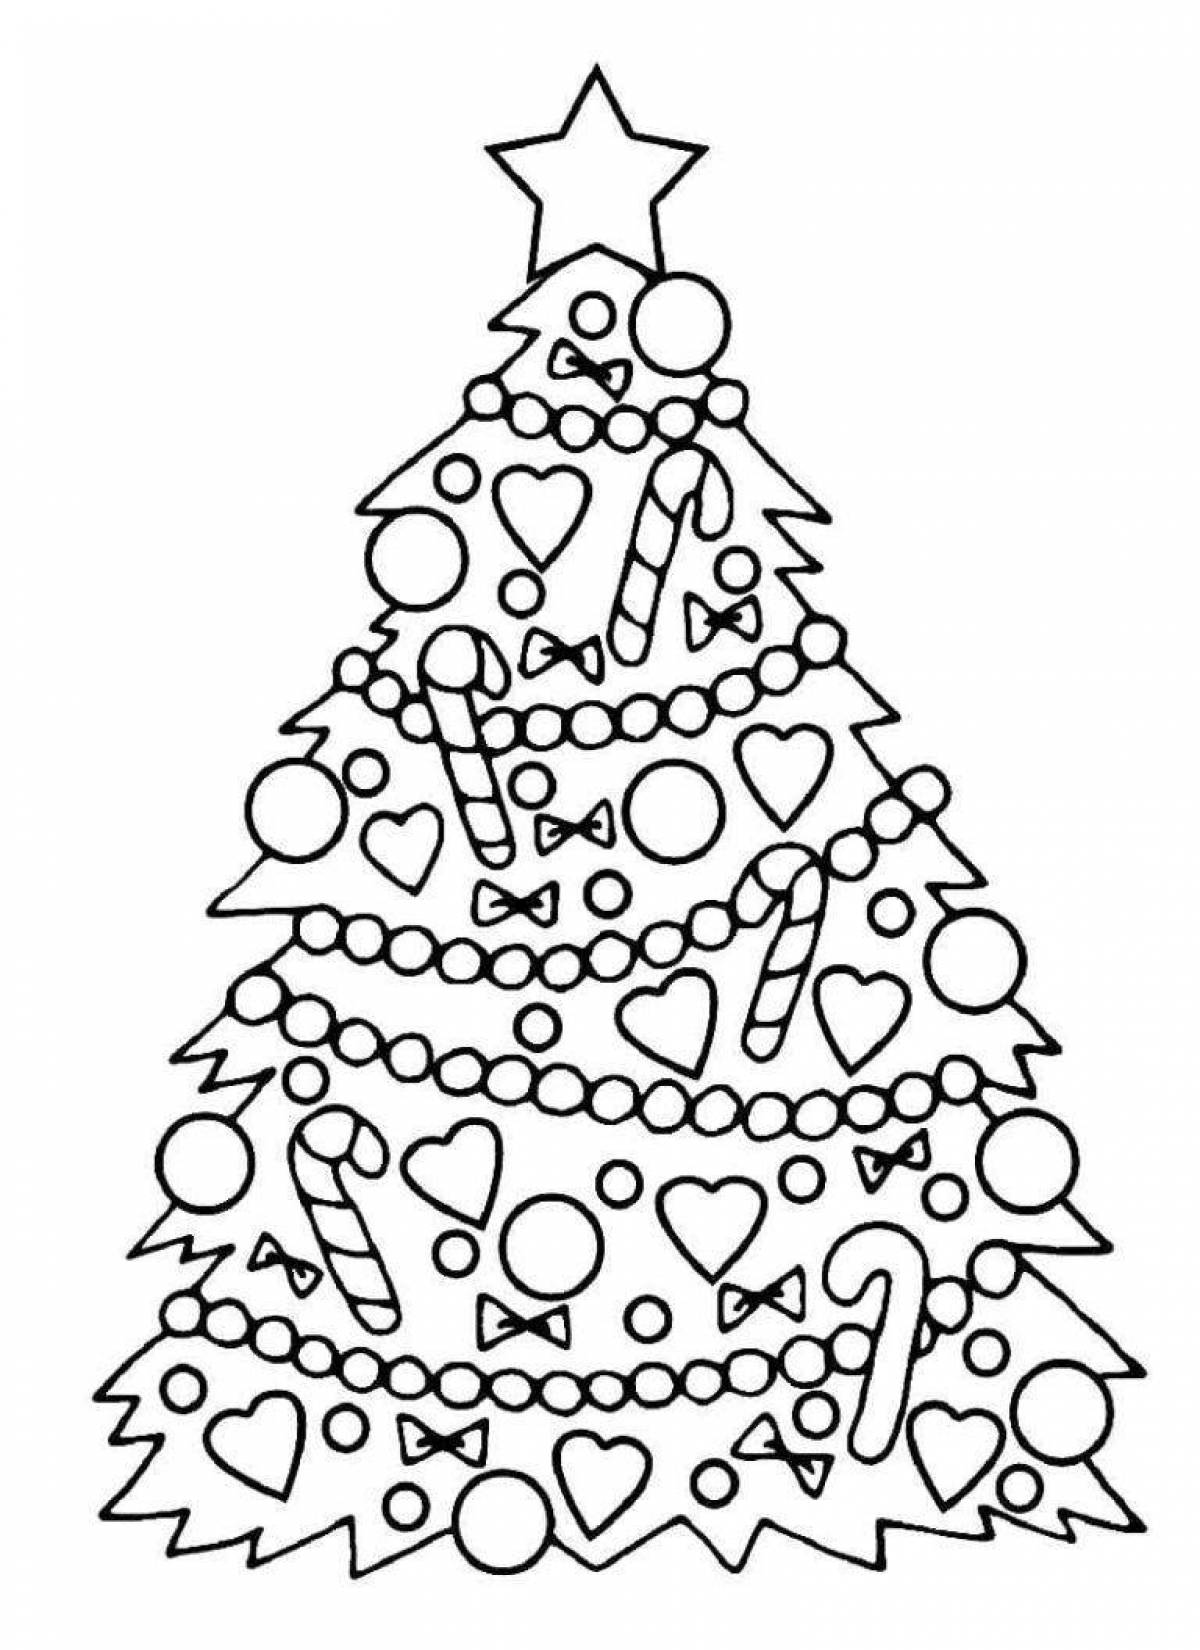 Sparkling Christmas tree coloring book for 4-5 year olds